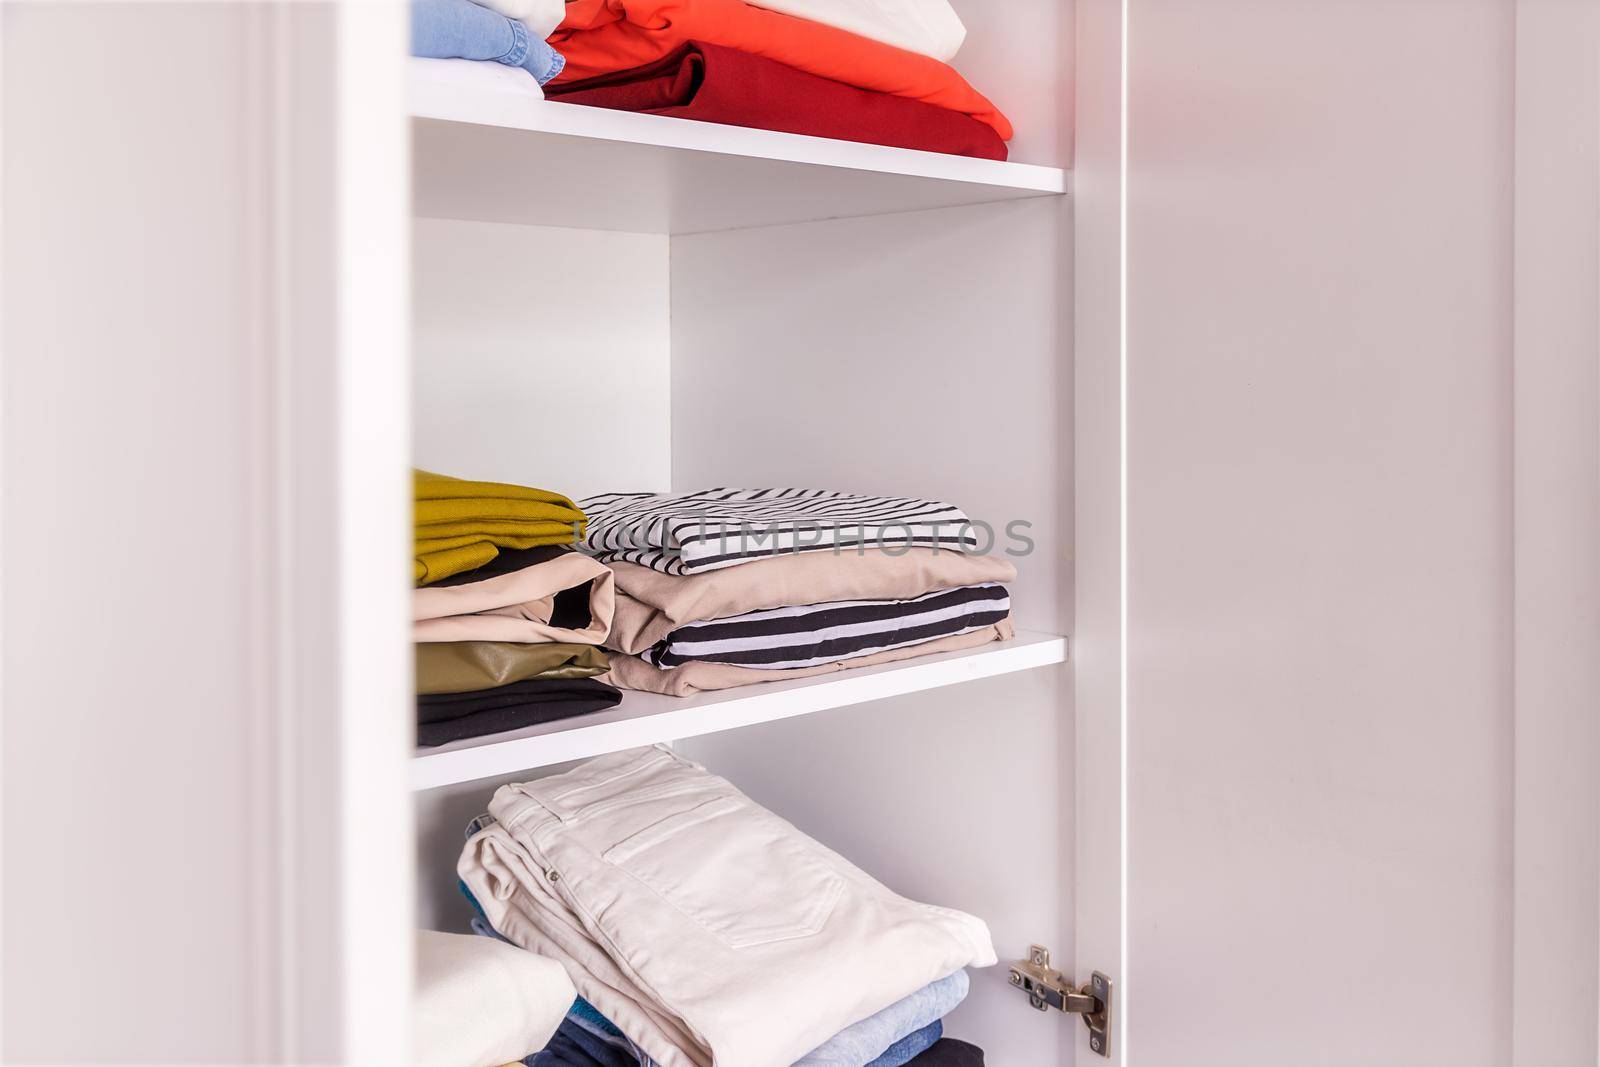 close-up, open white closet with shelves on which lie neatly folded sweaters and shirts. The concept of easy ironing, minimalism, organization of things and space. Optimizing wardrobe items